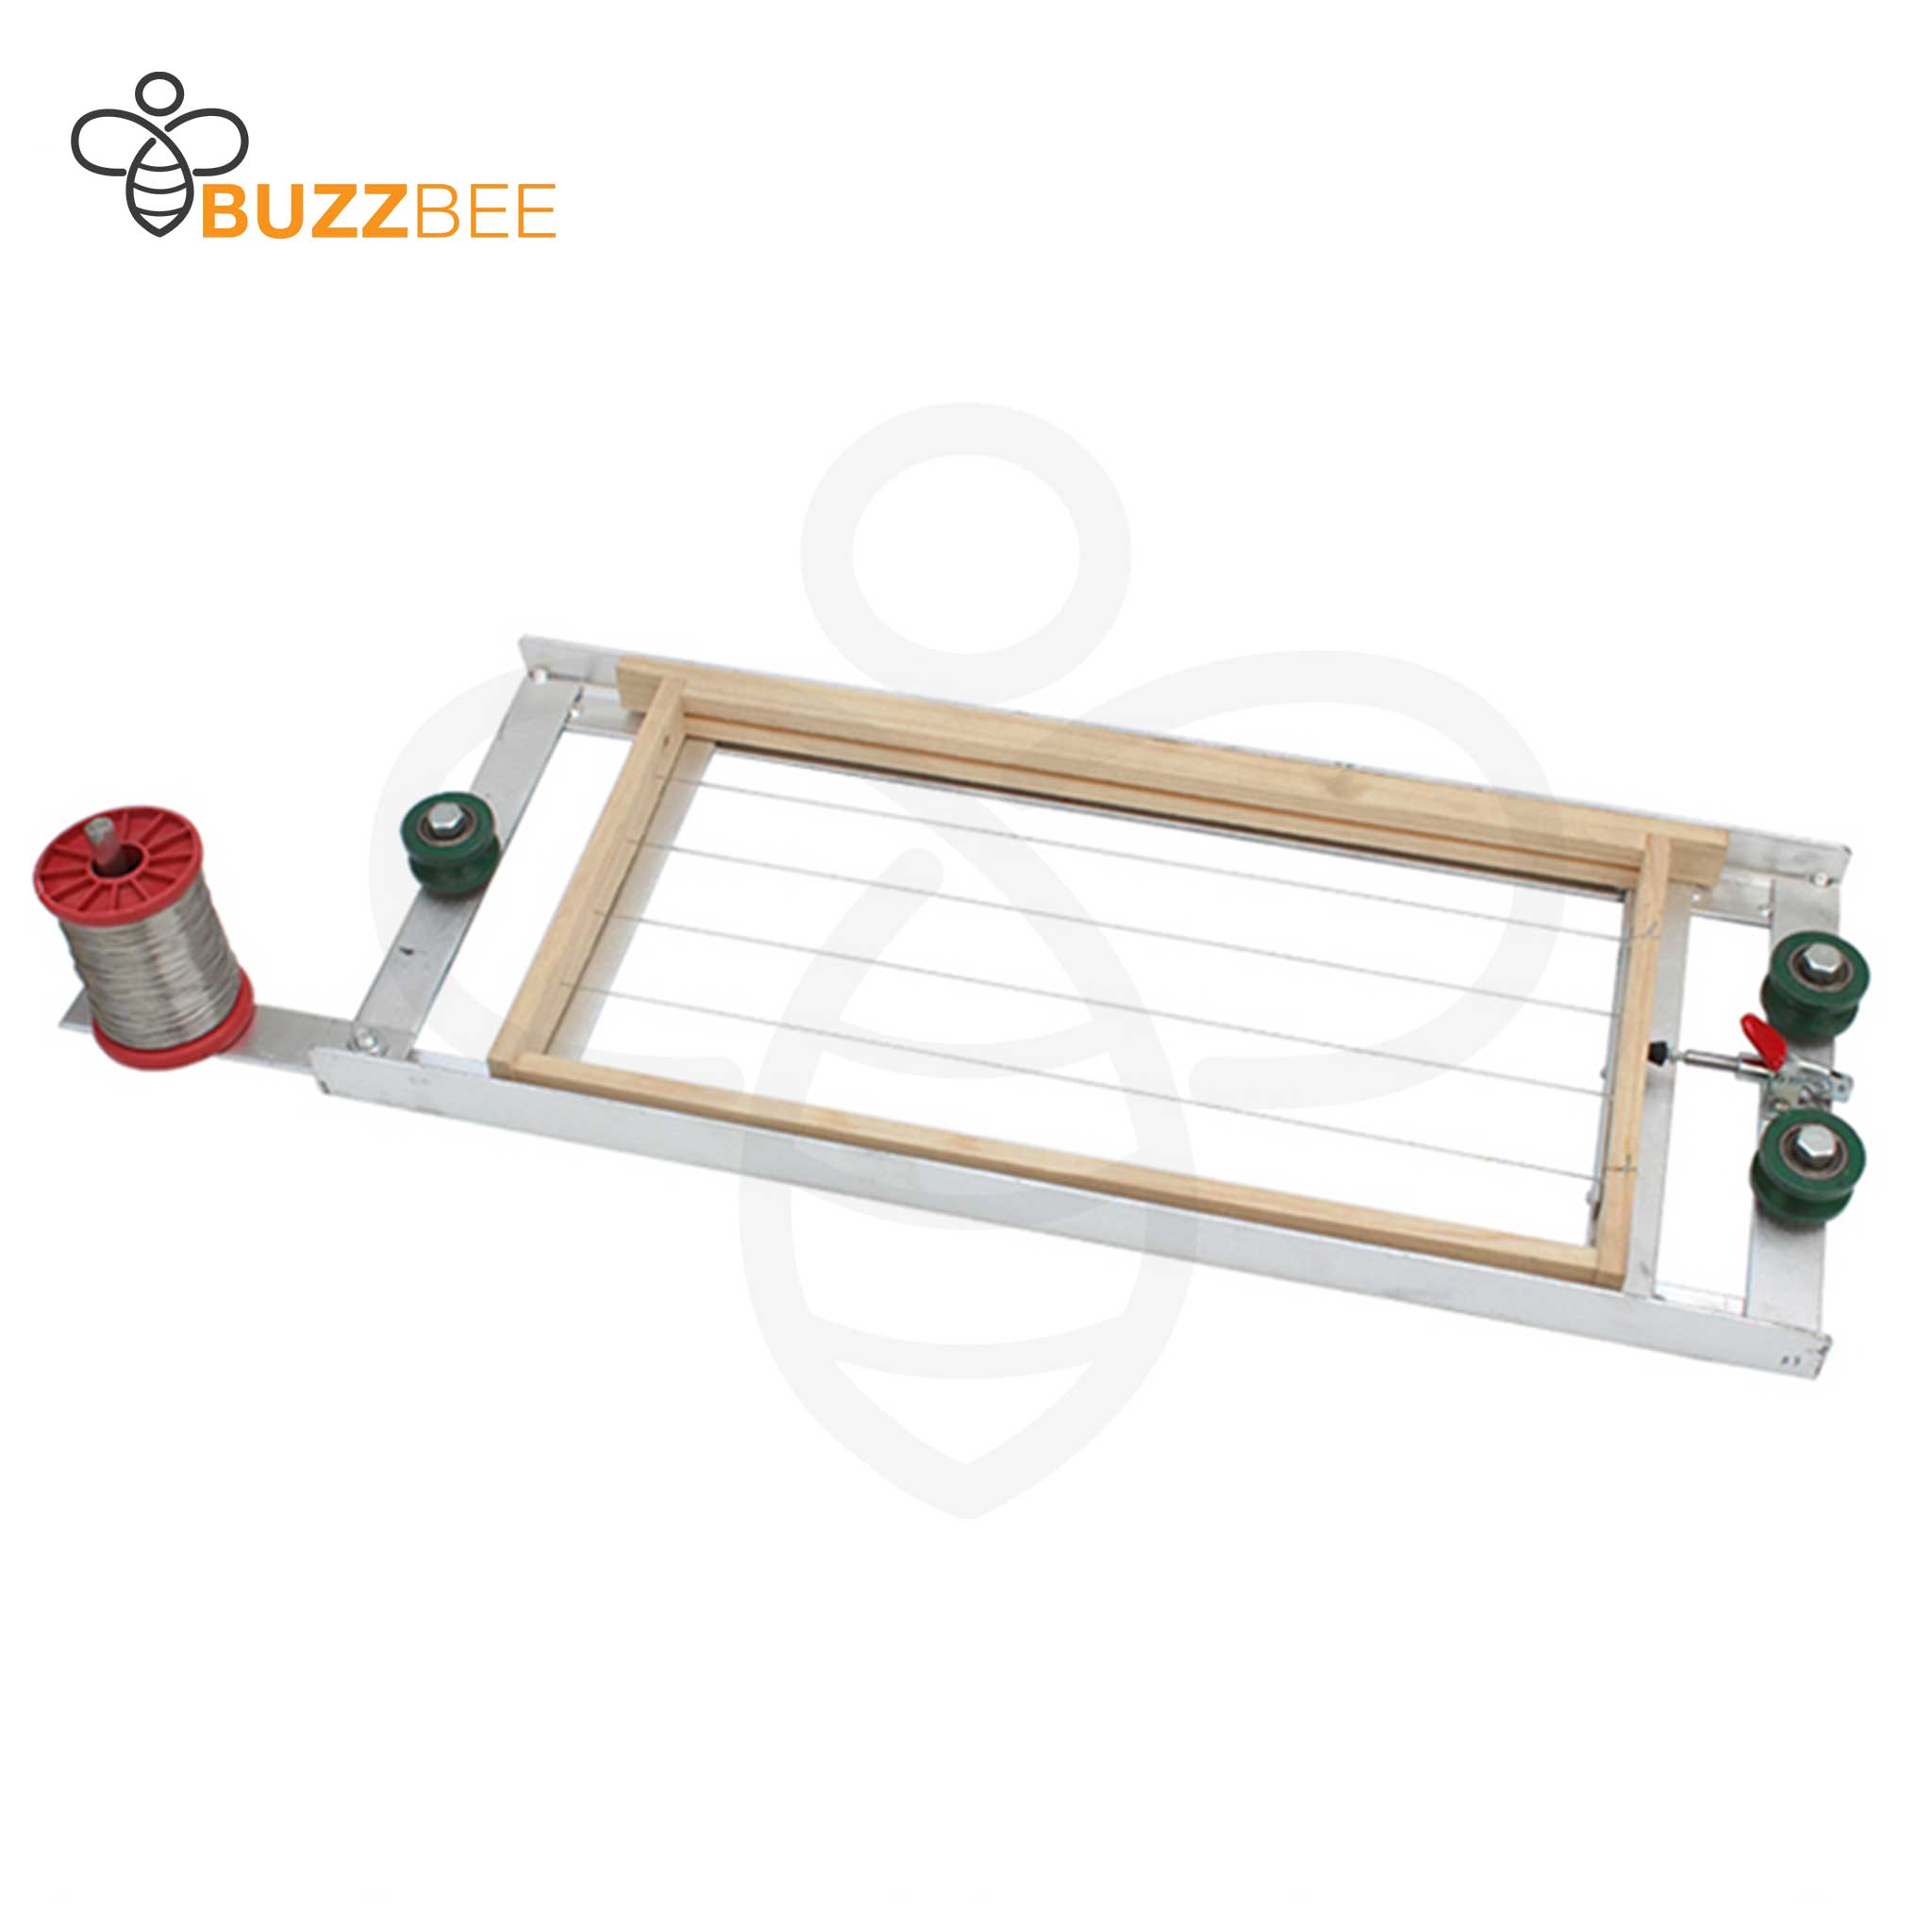 Beekeeping Frame Wiring Assembly Tool - Tools collection by Buzzbee Beekeeping Supplies